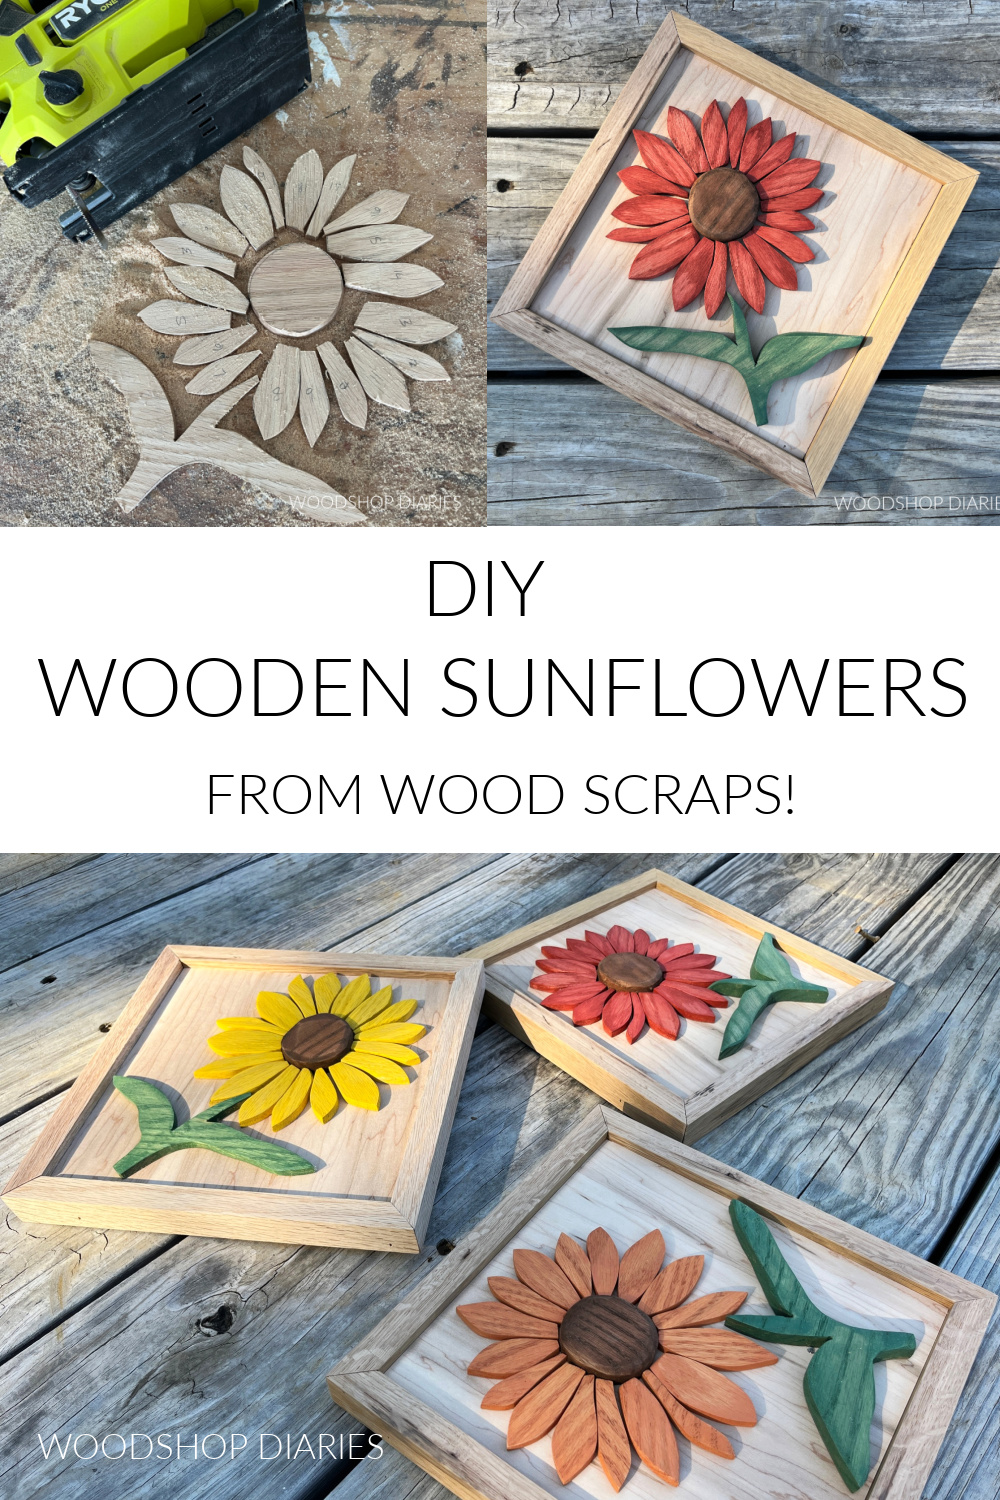 Pinterest collage showing flower pieces cut out on top left, completed red sunflower on top right, and all three together on bottom with text "DIY wooden sunflowers from wood scraps!"